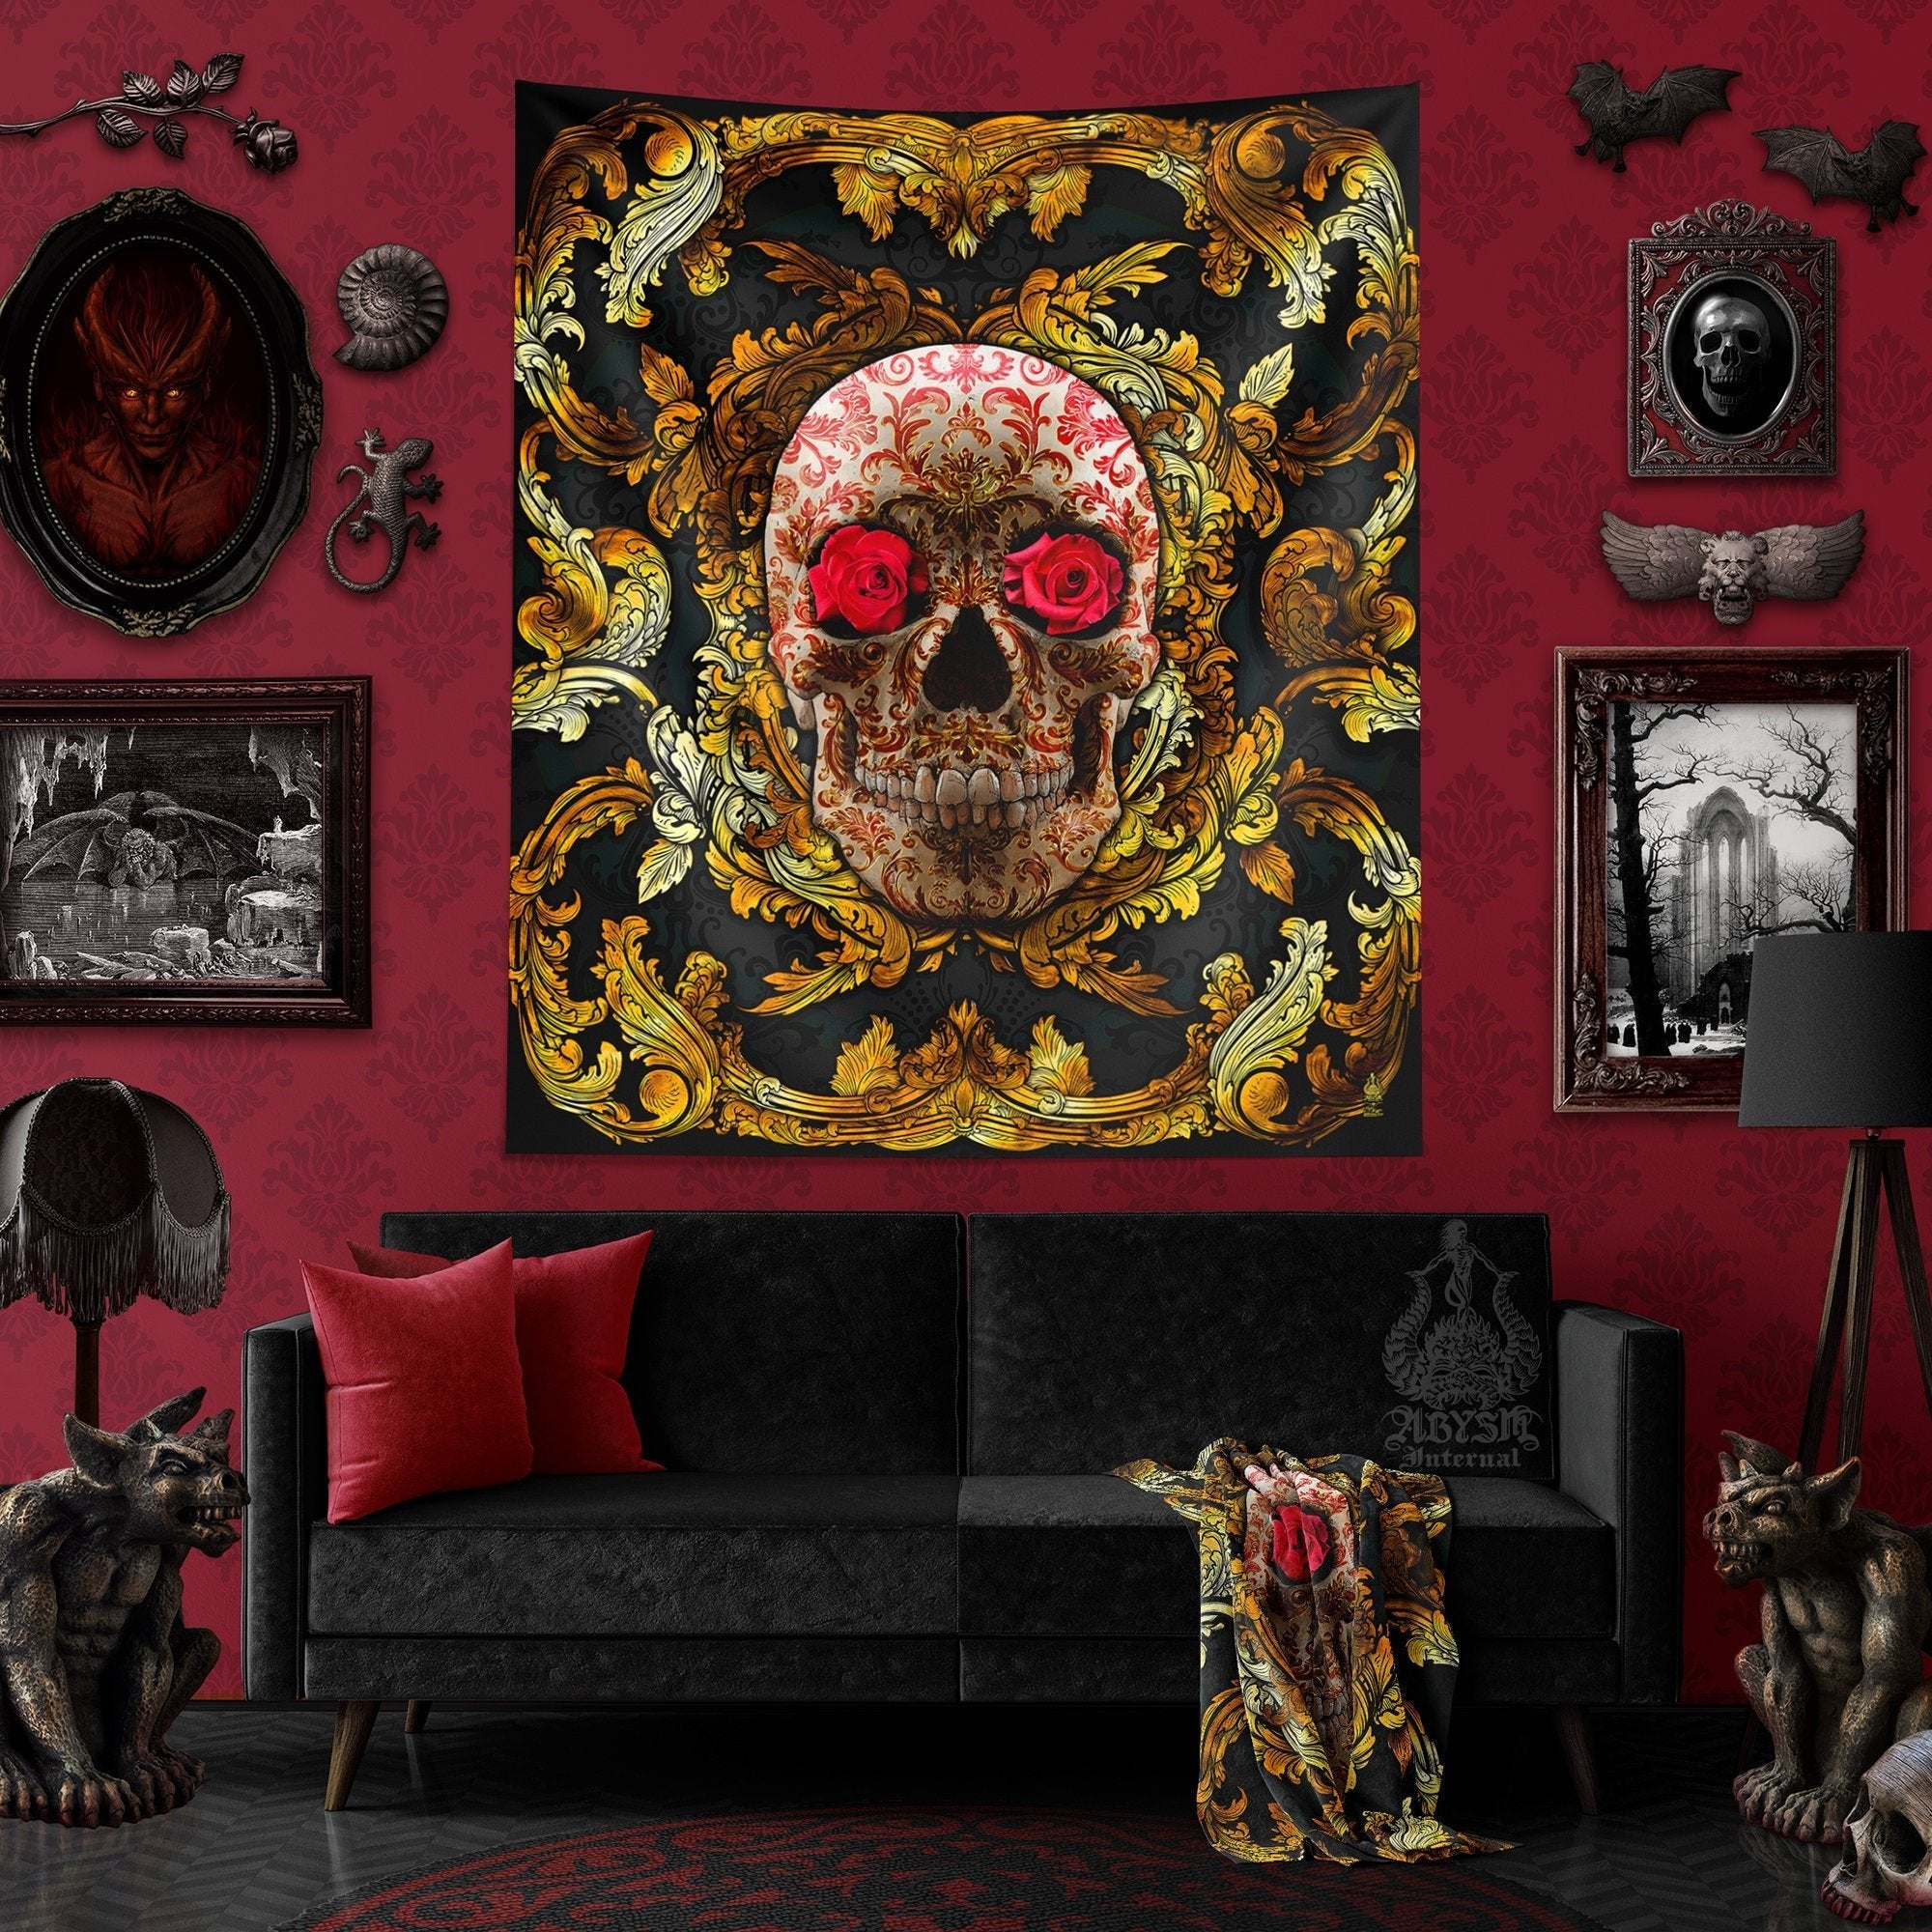 Skull Tapestry, Macabre Wall Hanging, Goth Home Decor, Art Print - Gold & Red Roses - Abysm Internal